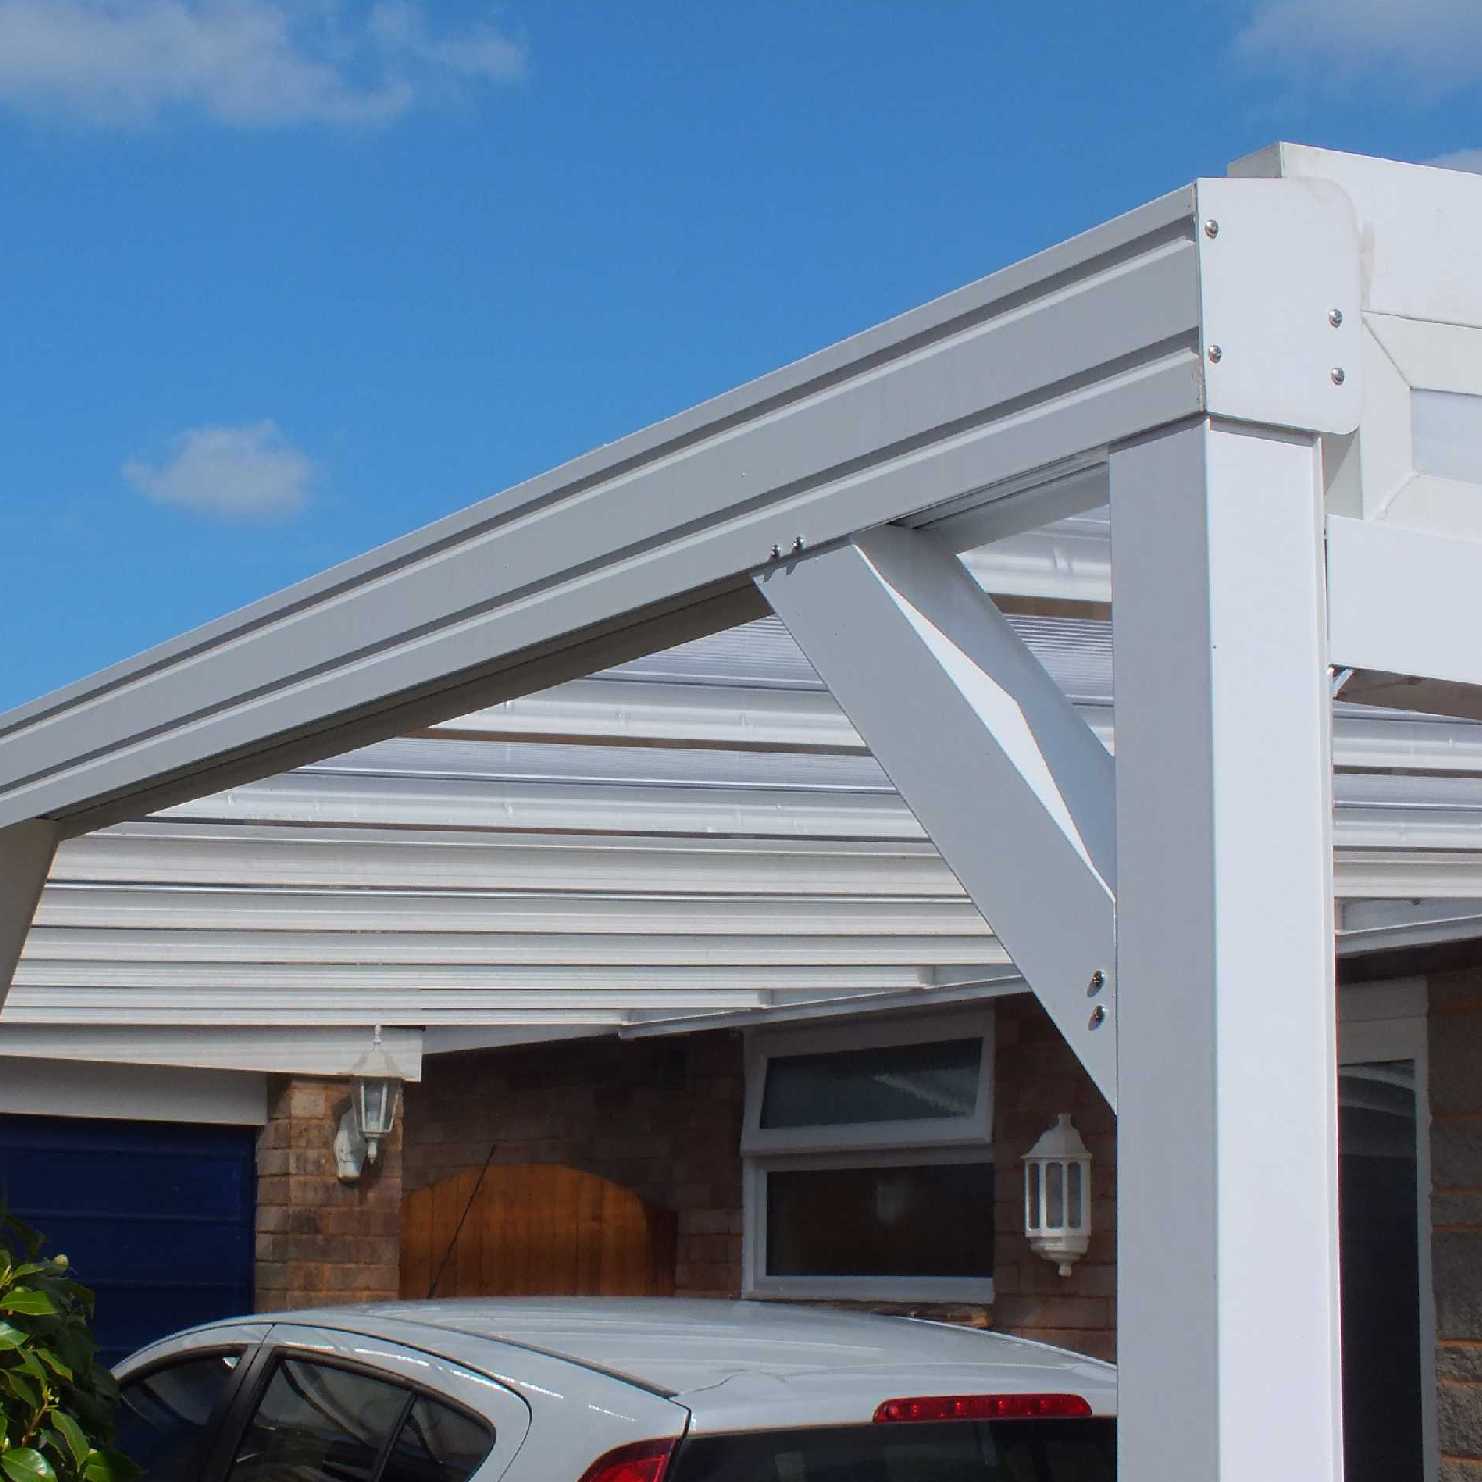 Buy Omega Smart Lean-To Canopy, White with 16mm Polycarbonate Glazing - 11.4m (W) x 4.0m (P), (5) Supporting Posts online today